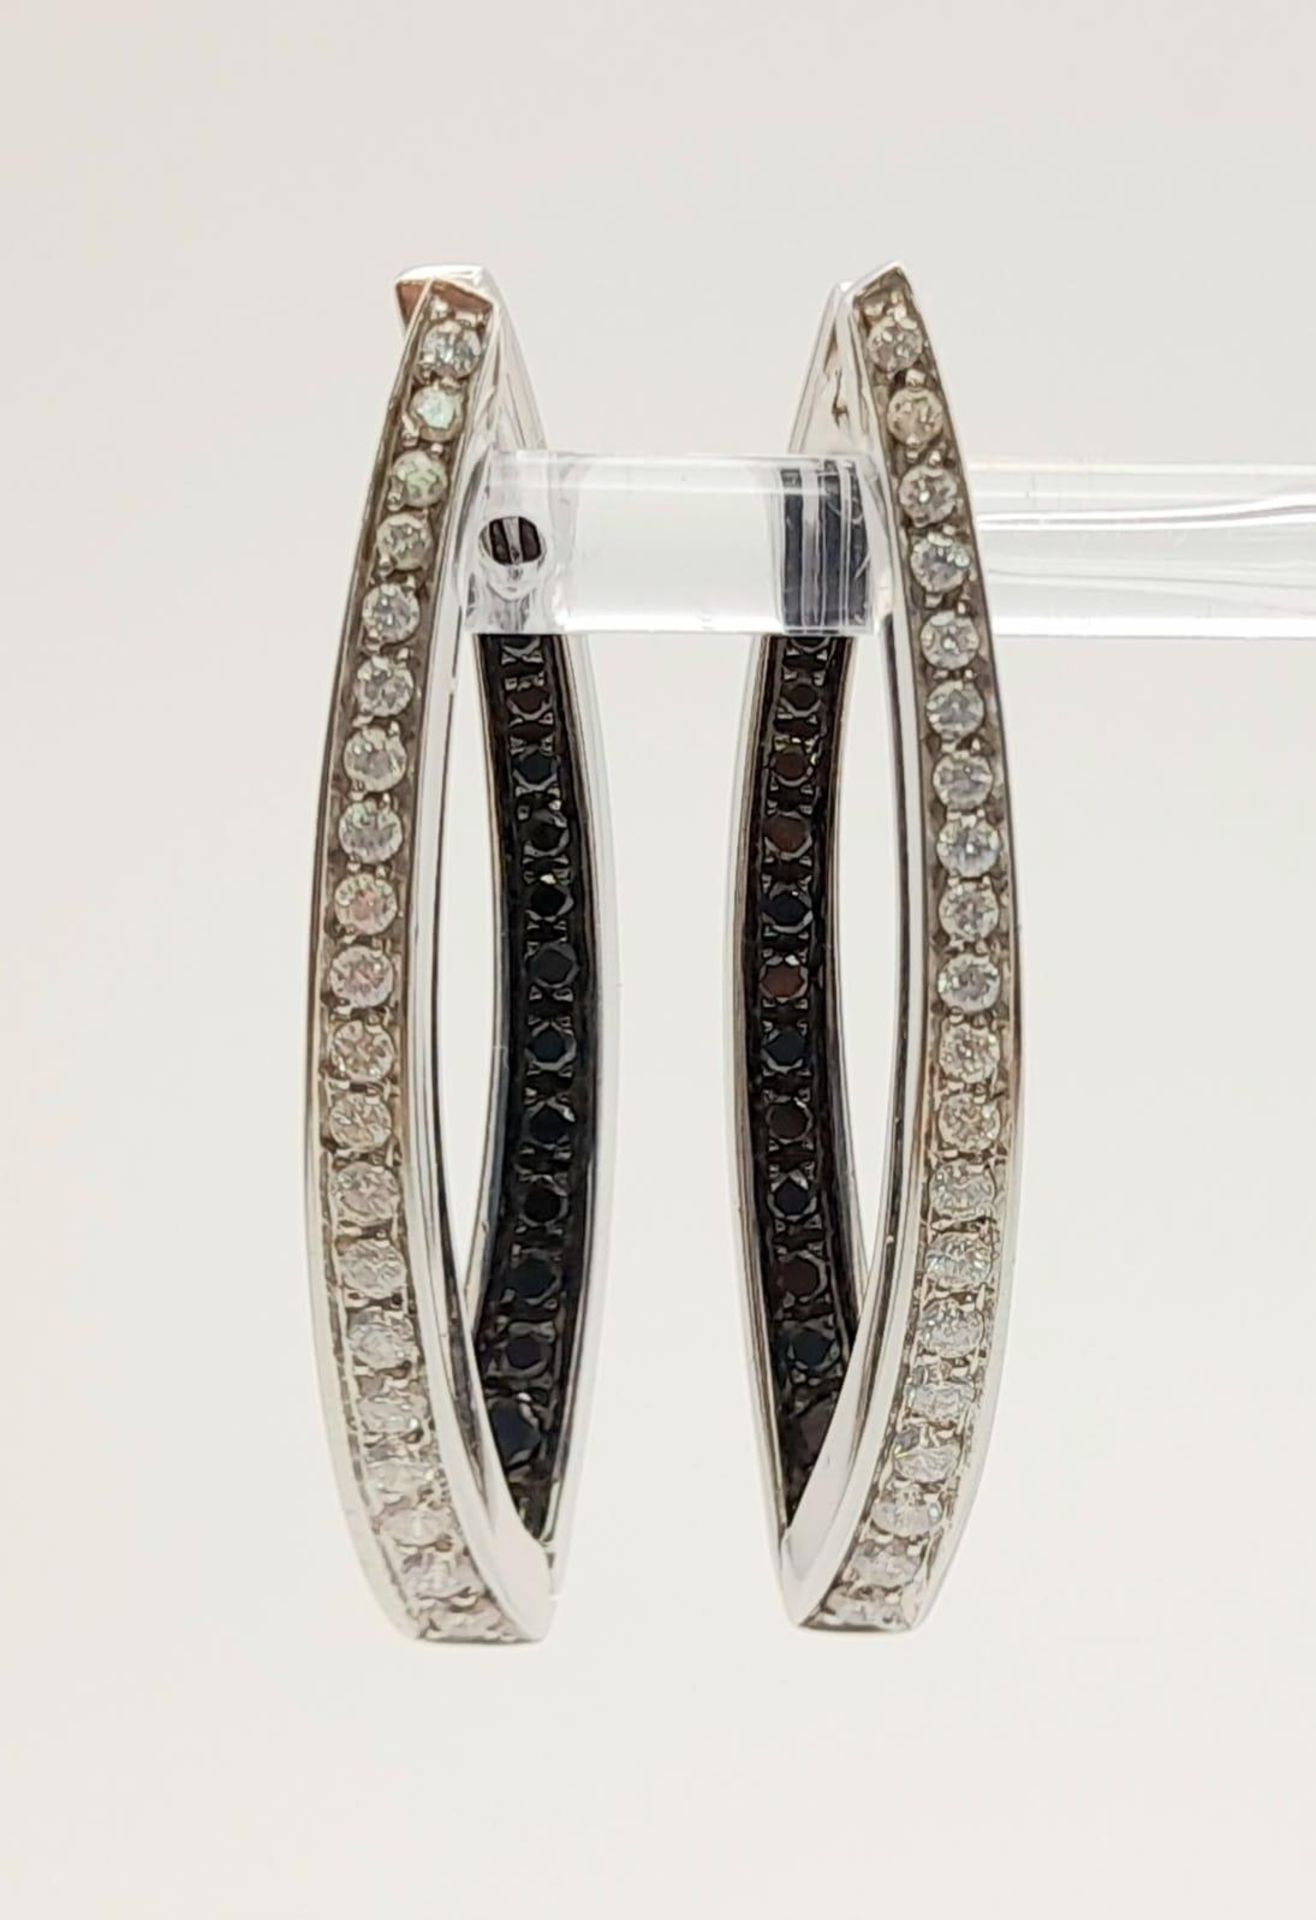 A Pair of Designer Palmiero 18K White Gold, Black and White Diamond Elongated Hoop Earrings. 0. - Image 2 of 9